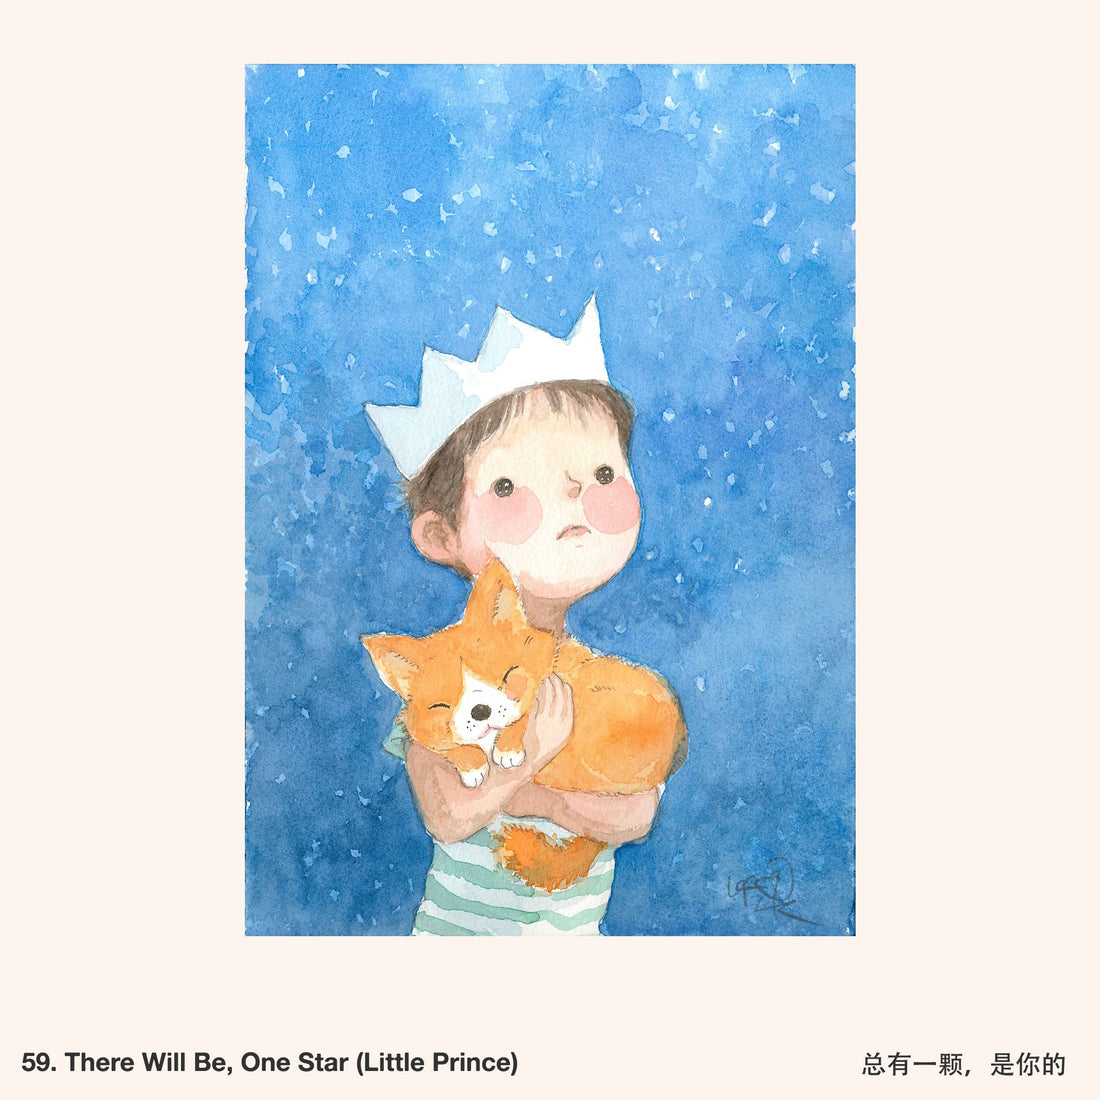 59. There Will Be One Star (Little Prince) Artwork